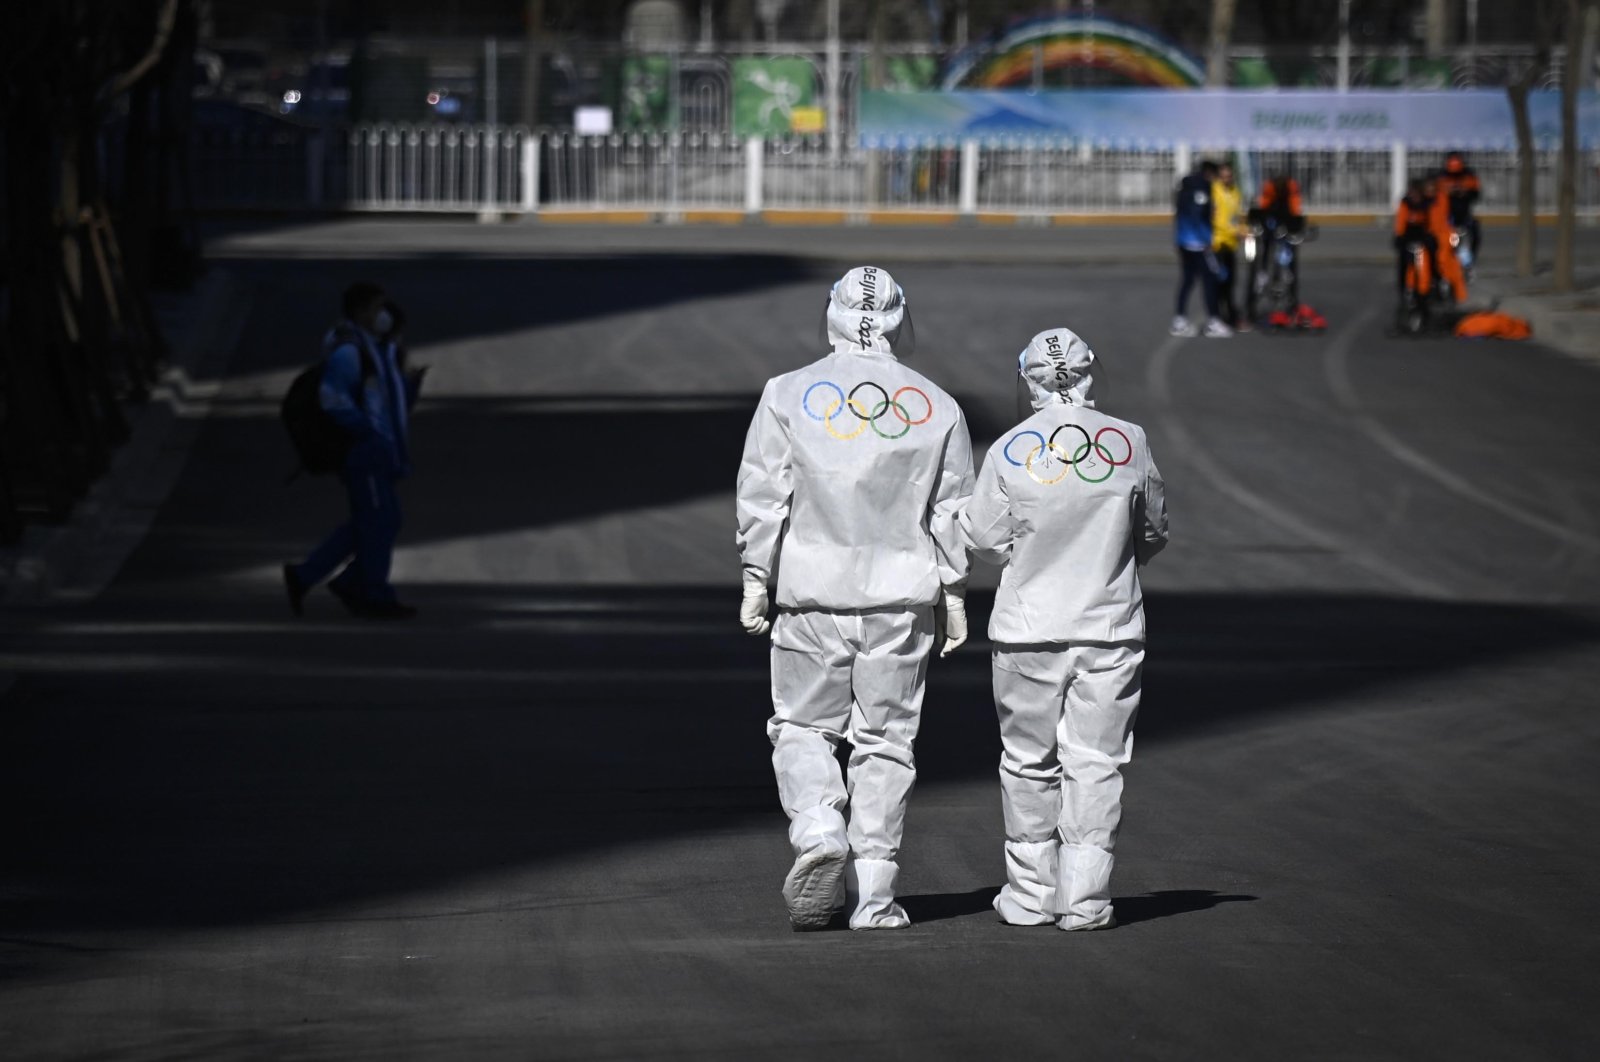 Olympic workers in protective suits walk on a road at the Olympic Village, Beijing, China, Feb. 1, 2022. (AP Photo)